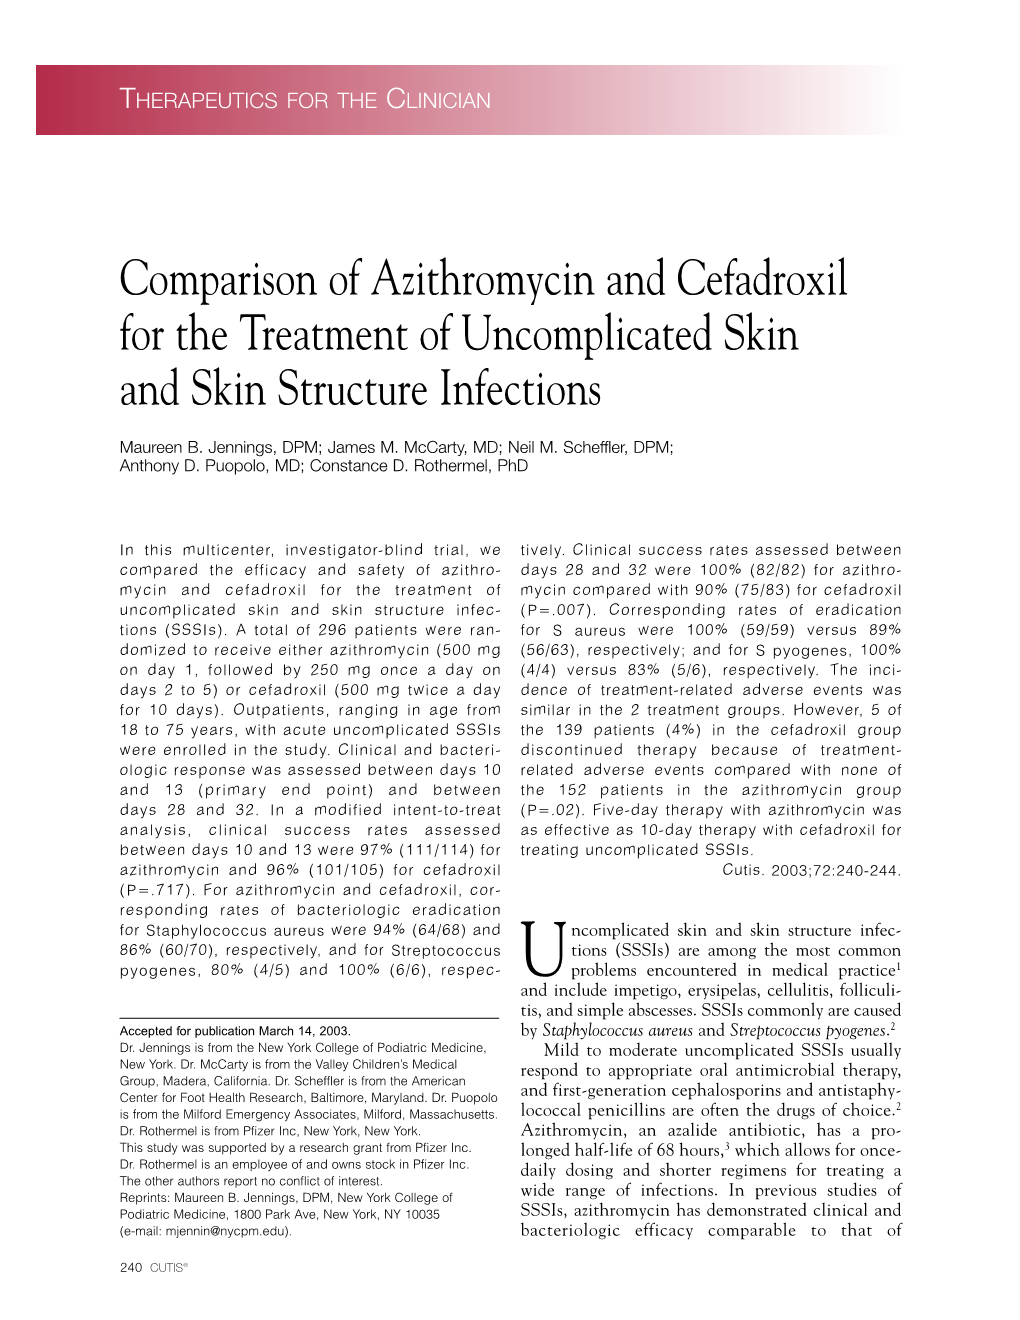 Comparison of Azithromycin and Cefadroxil for the Treatment of Uncomplicated Skin and Skin Structure Infections